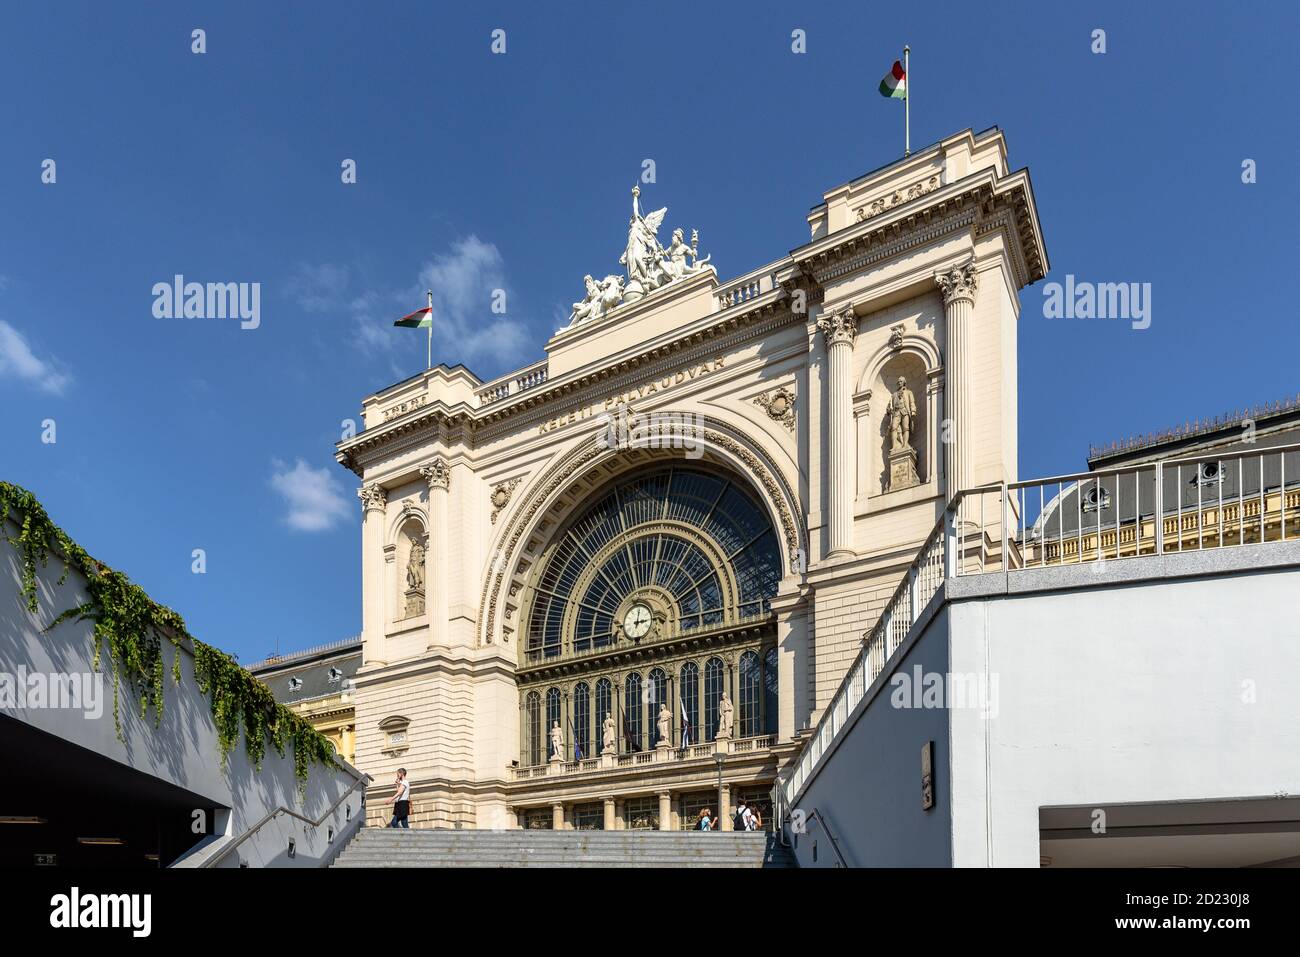 Budapest's Keleti Railway Terminal built in the eclectic architectural style Stock Photo